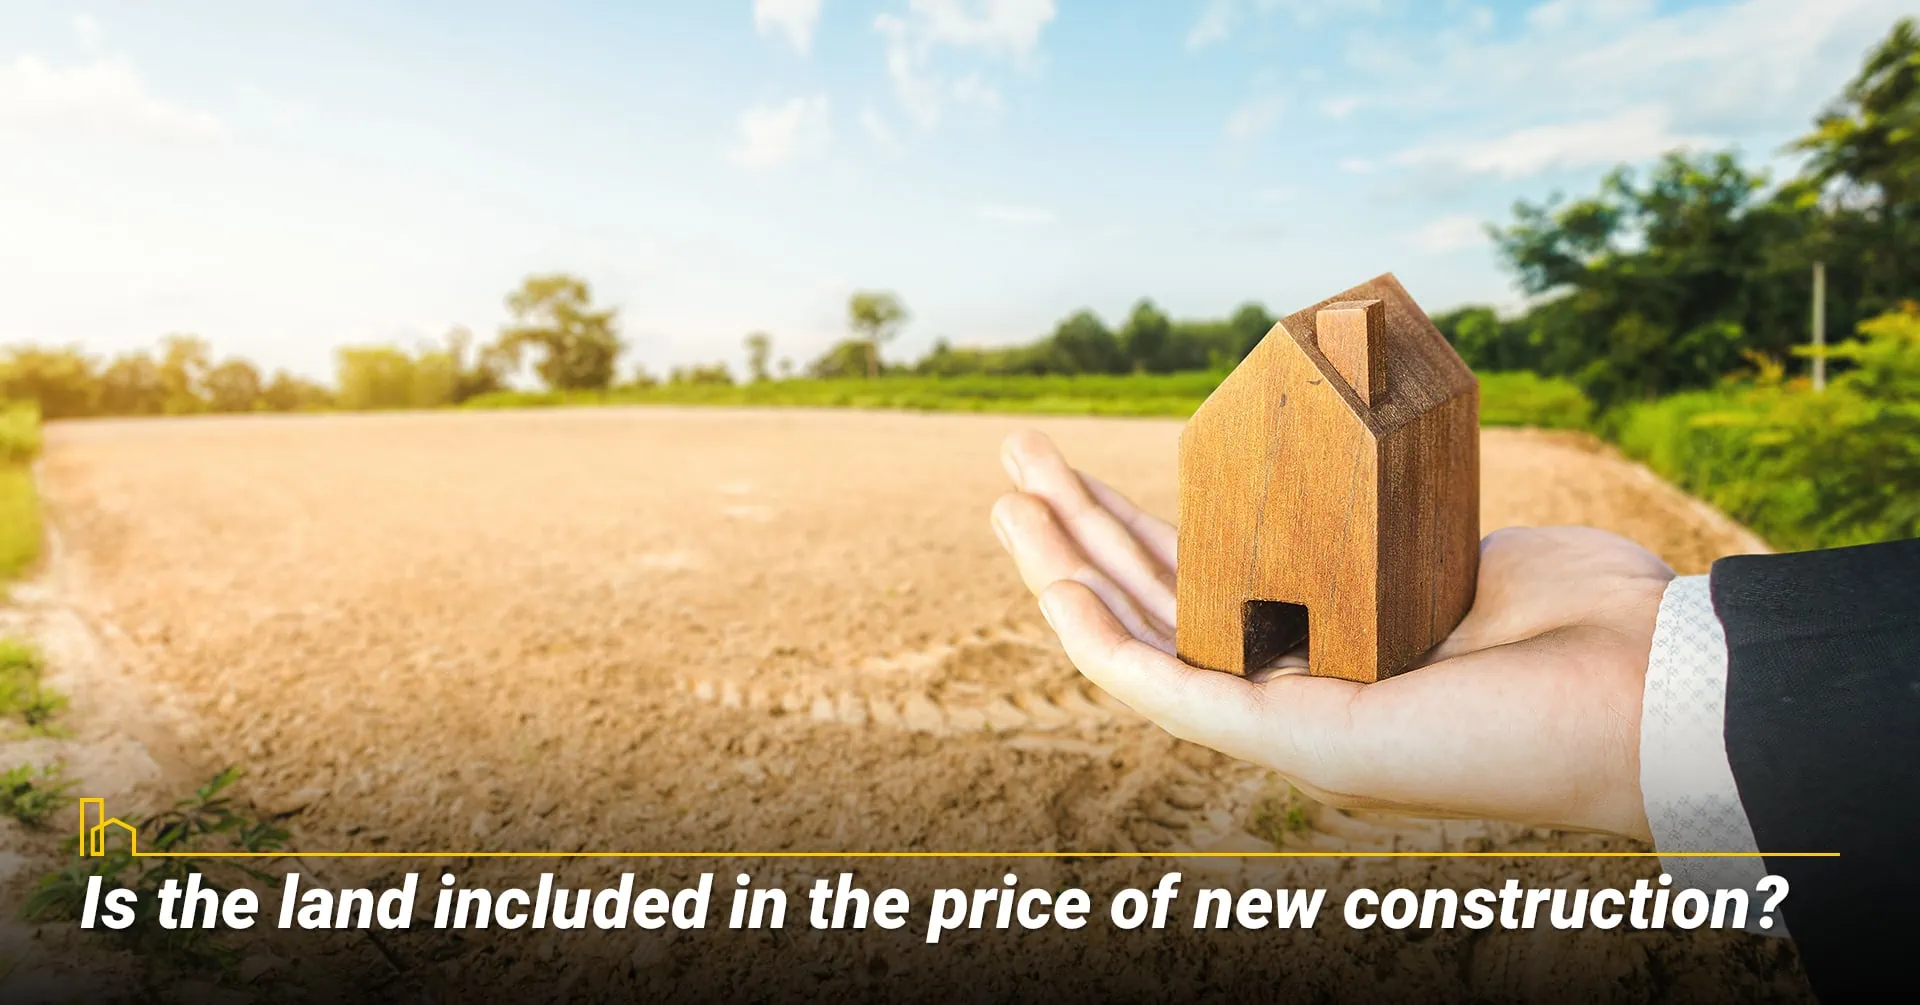 Is the land included in the price of new construction?